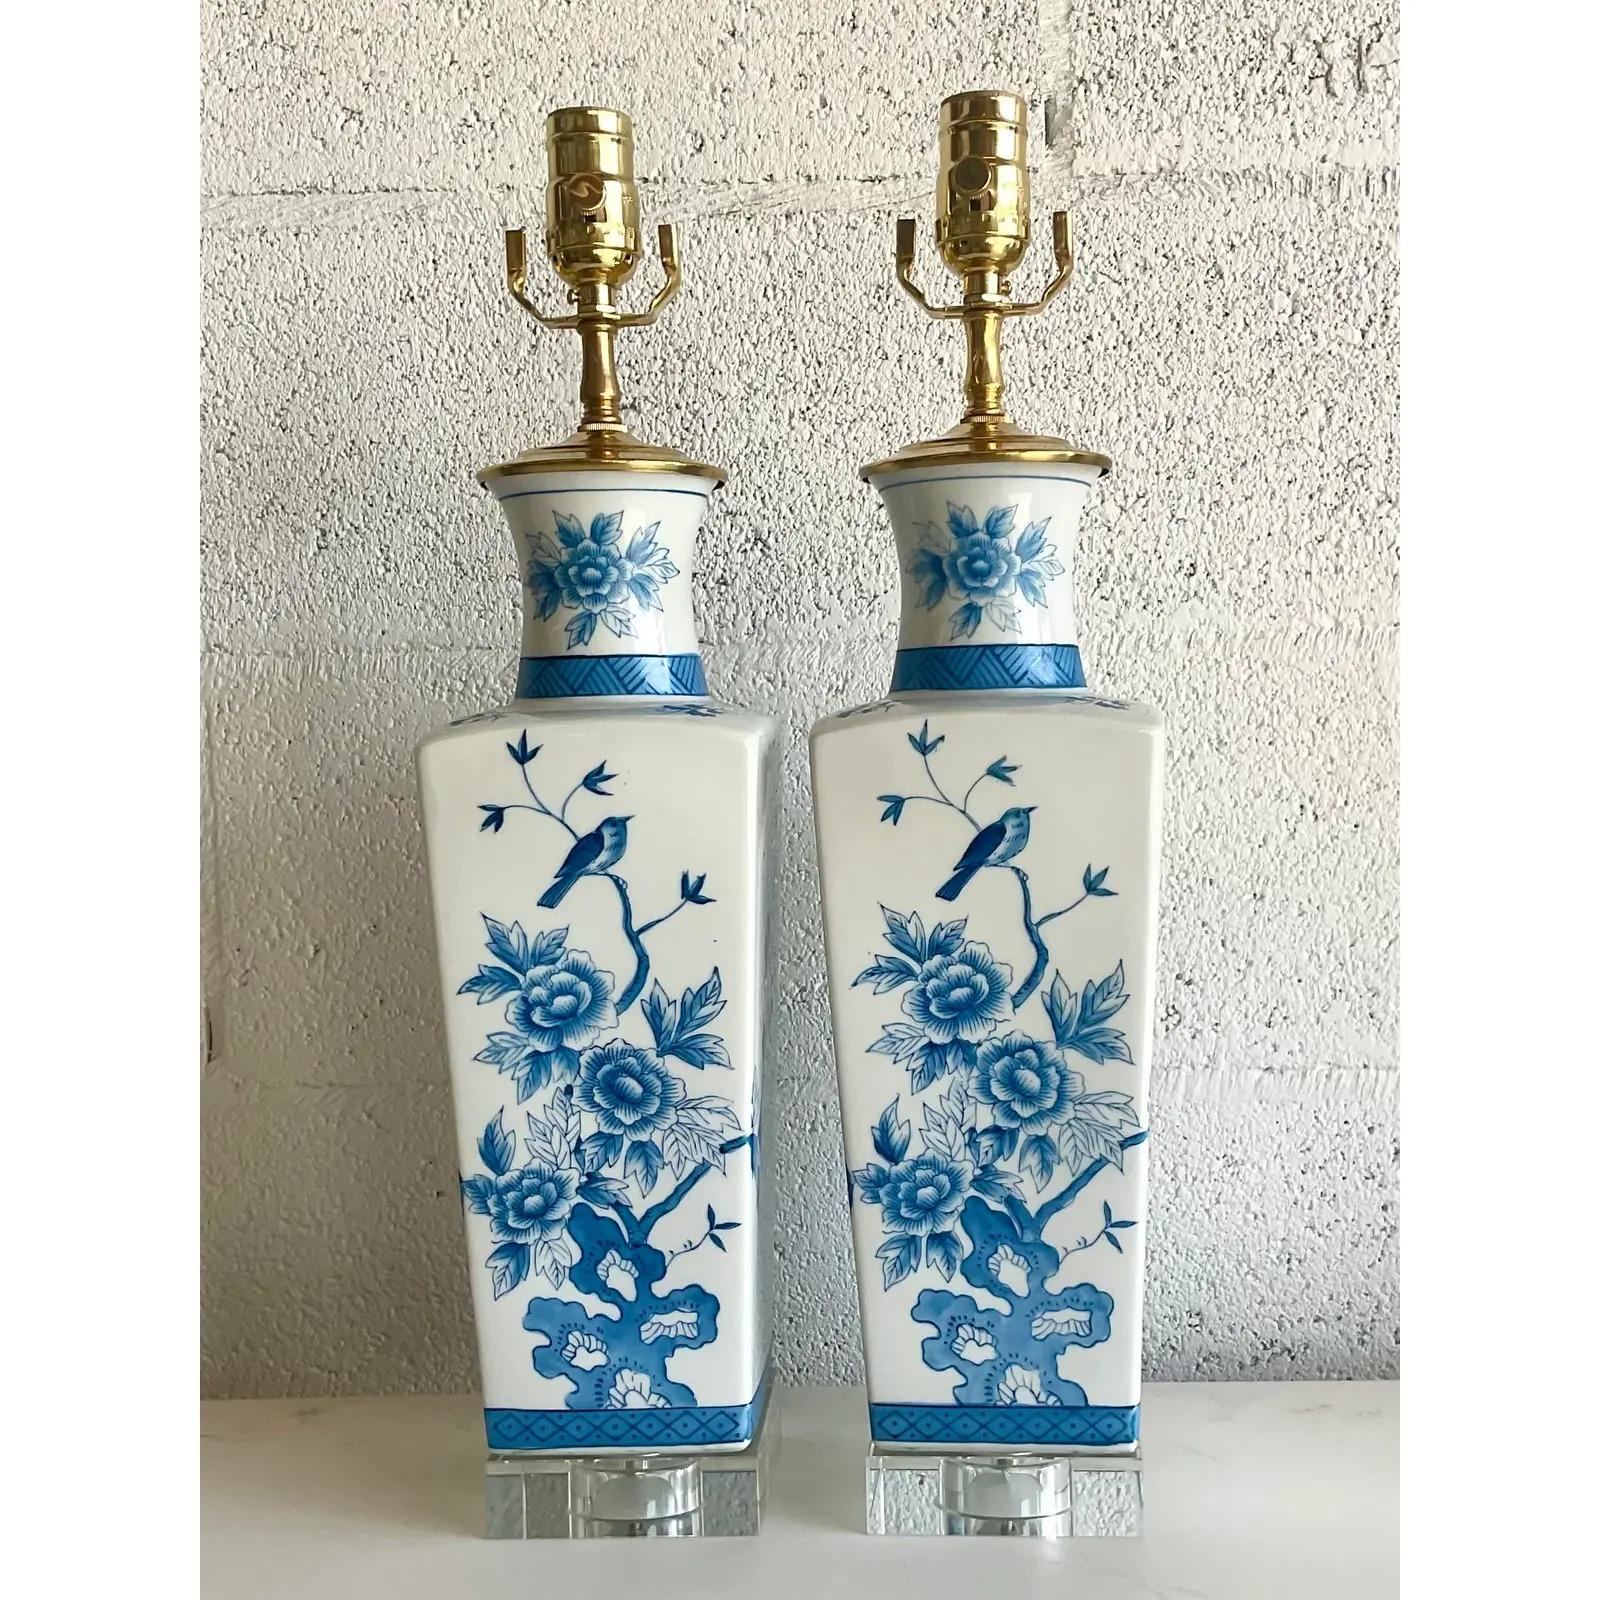 Vintage pair of Regency glazed ceramic table lamps. Beautiful blue and white chinoiserie print. All new hardware and wiring with sparking new crystal plinths. Acquired from a Palm Beach estate.